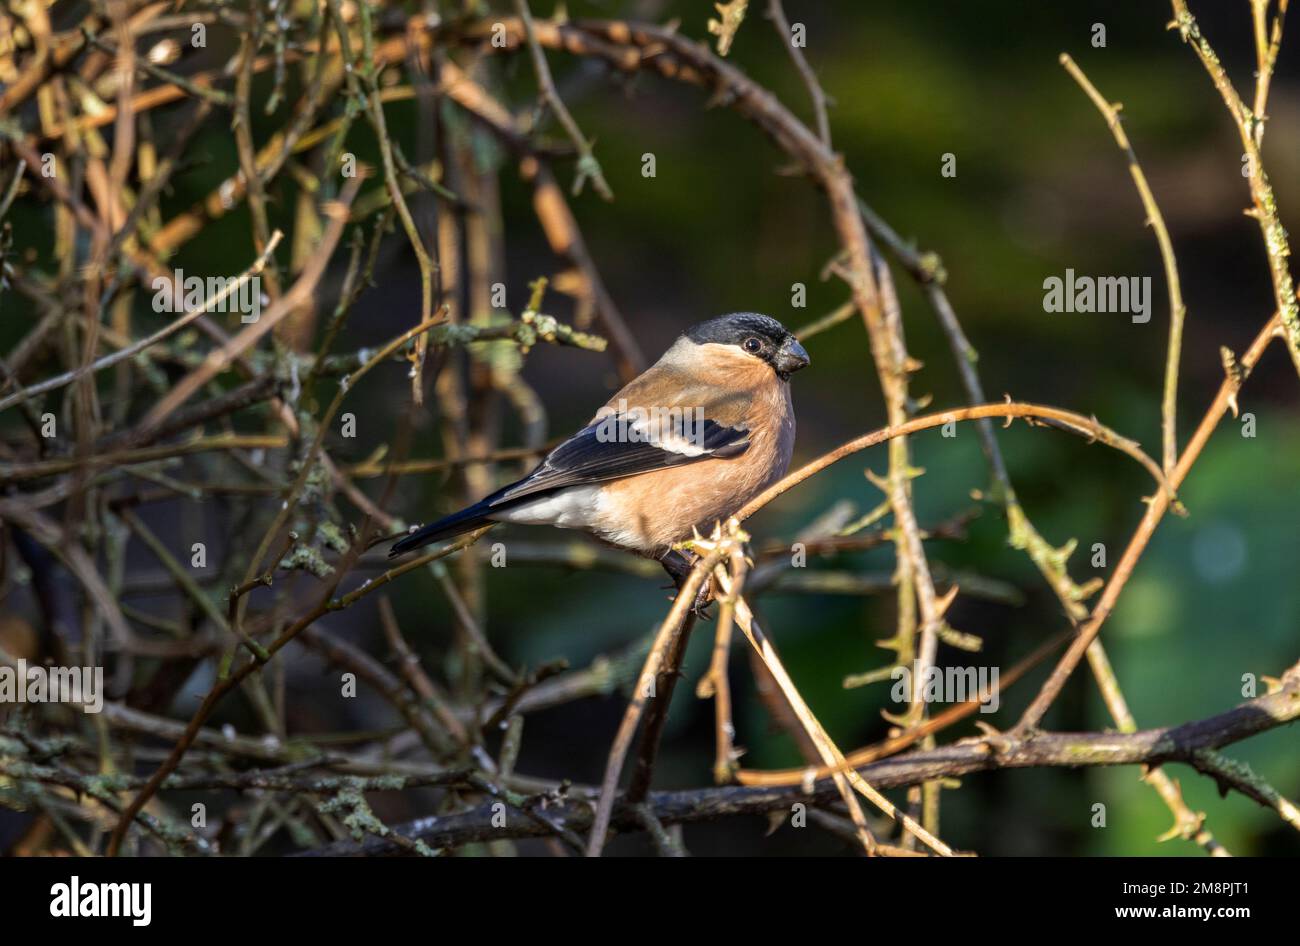 The female Bullfinch lacks the brilliant salmon pink breast feathers of the male but has a subtle beauty of plumage none the less. Stock Photo